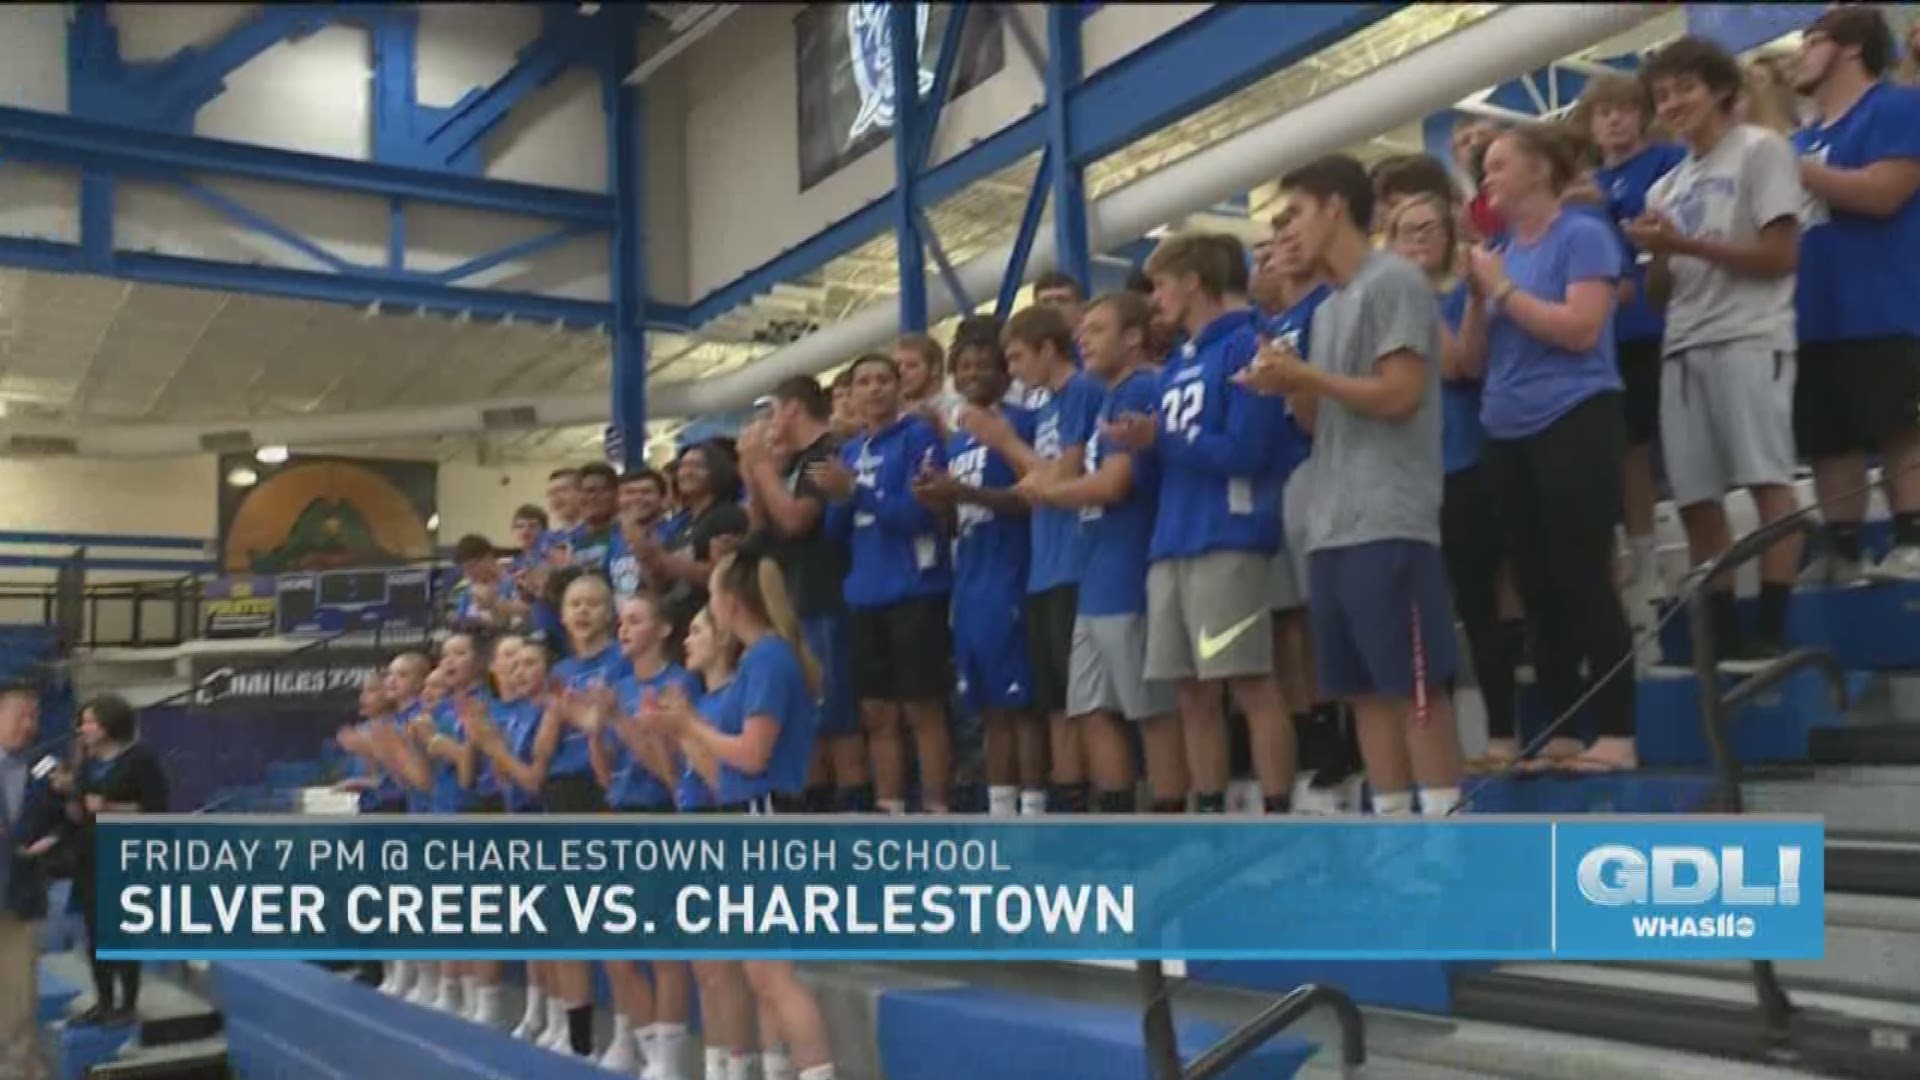 Charlestown High School will play Silver Creek on Friday, August 15, 2018.